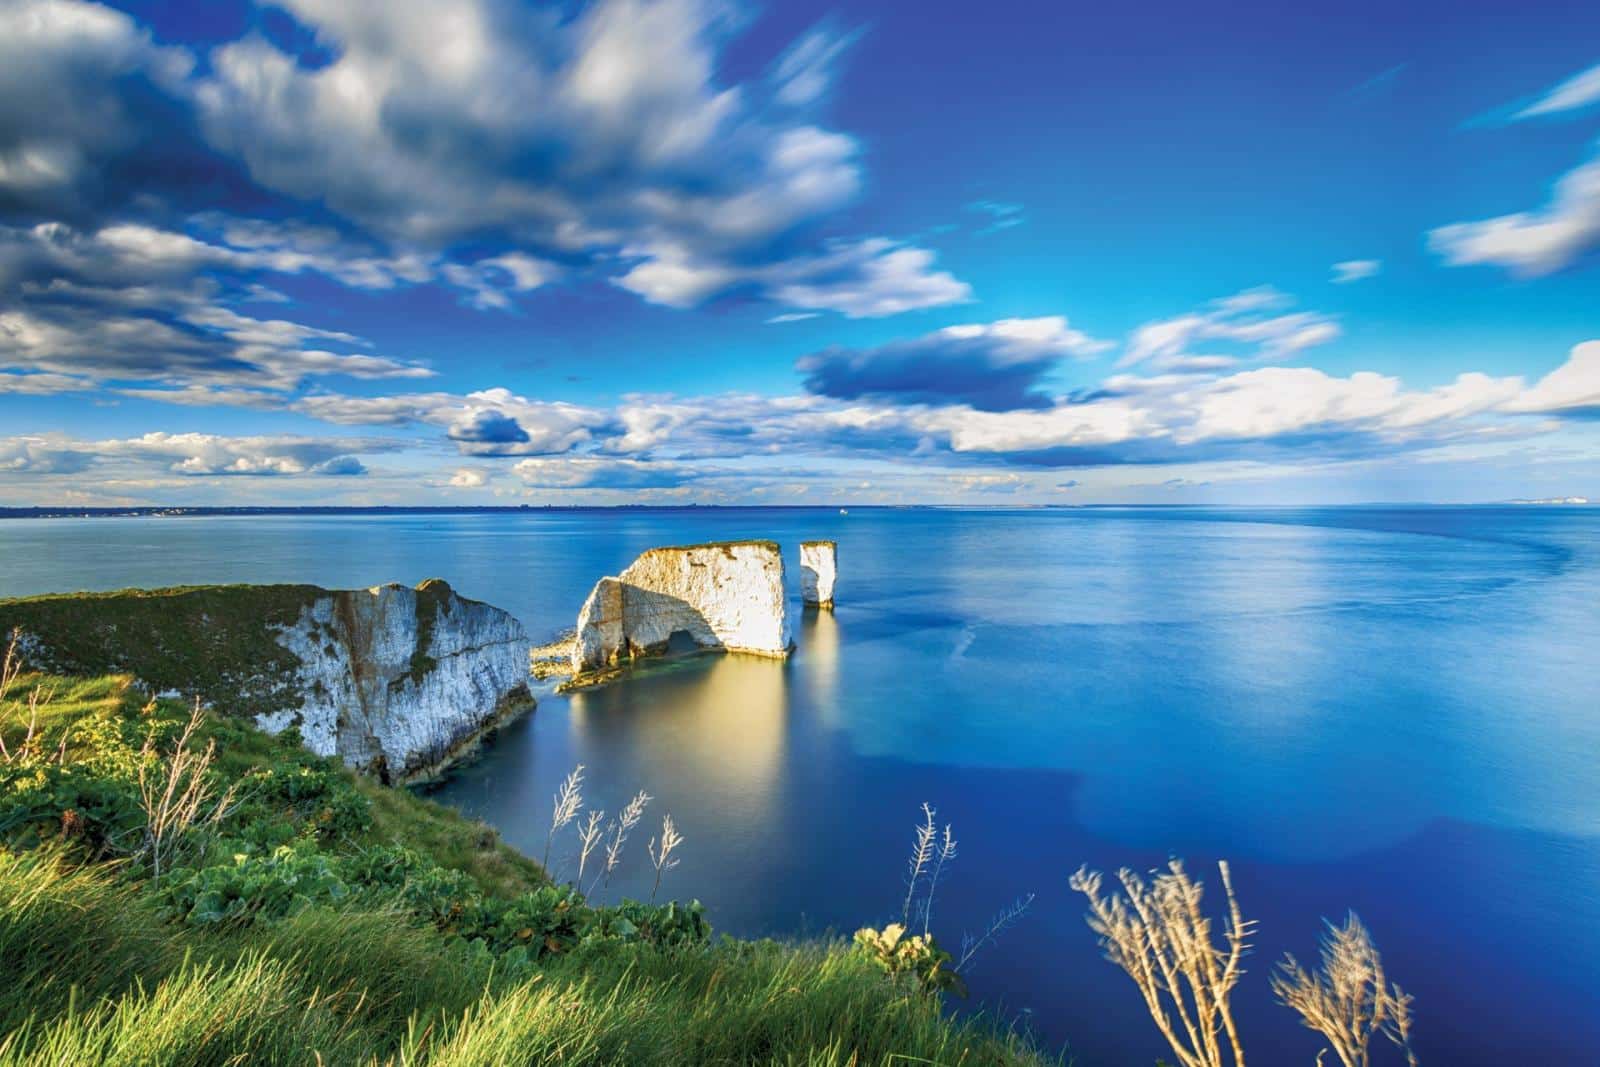 Take time and discover Dorset